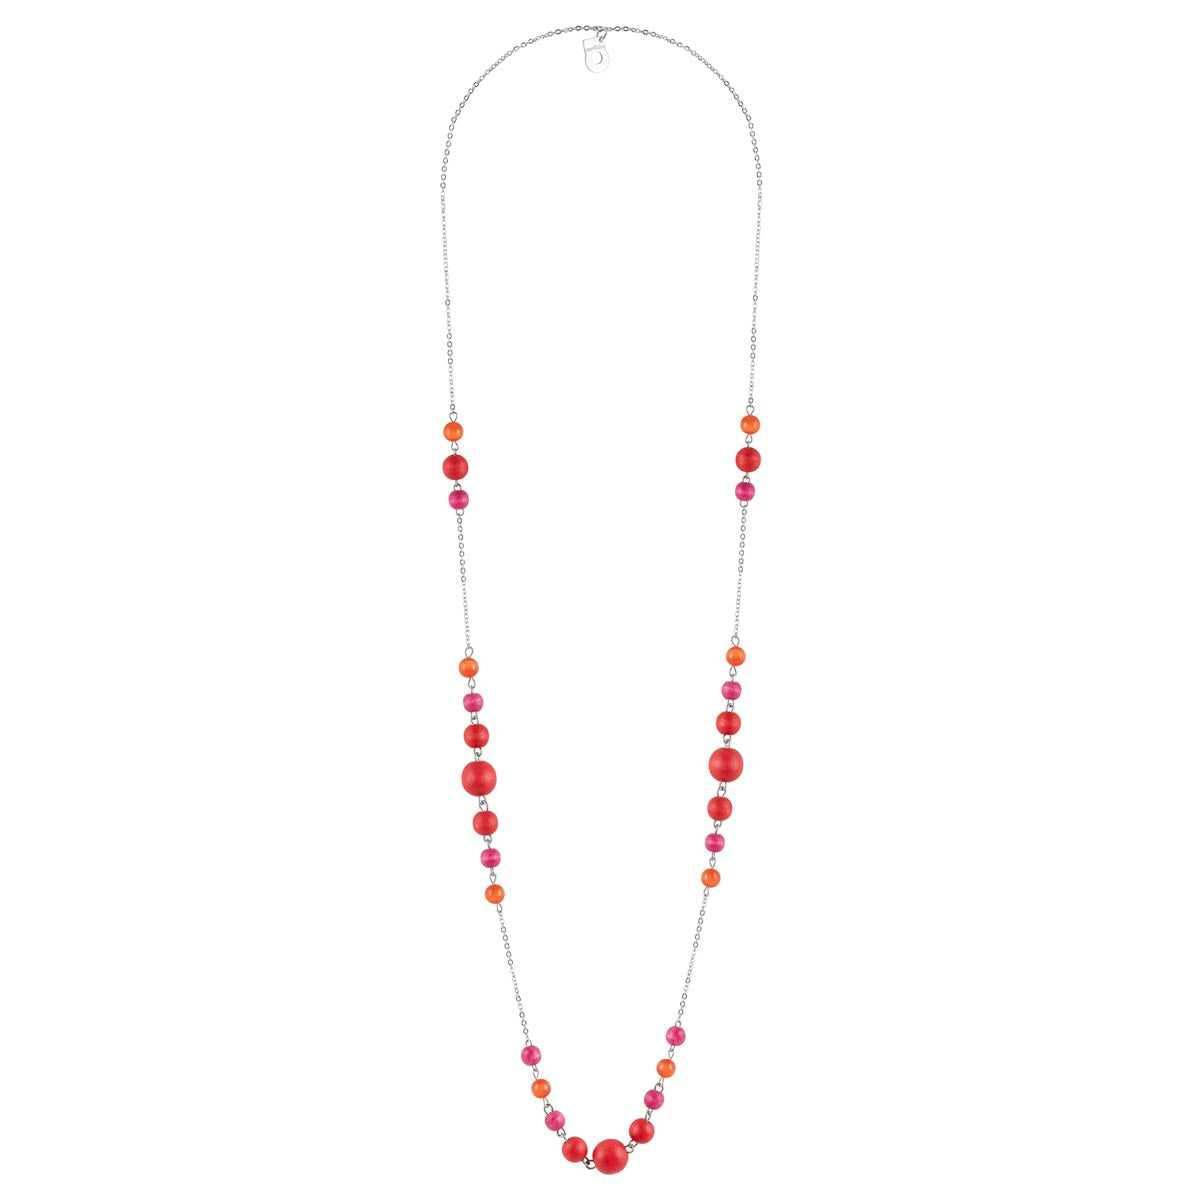 Irene necklace, shades of red